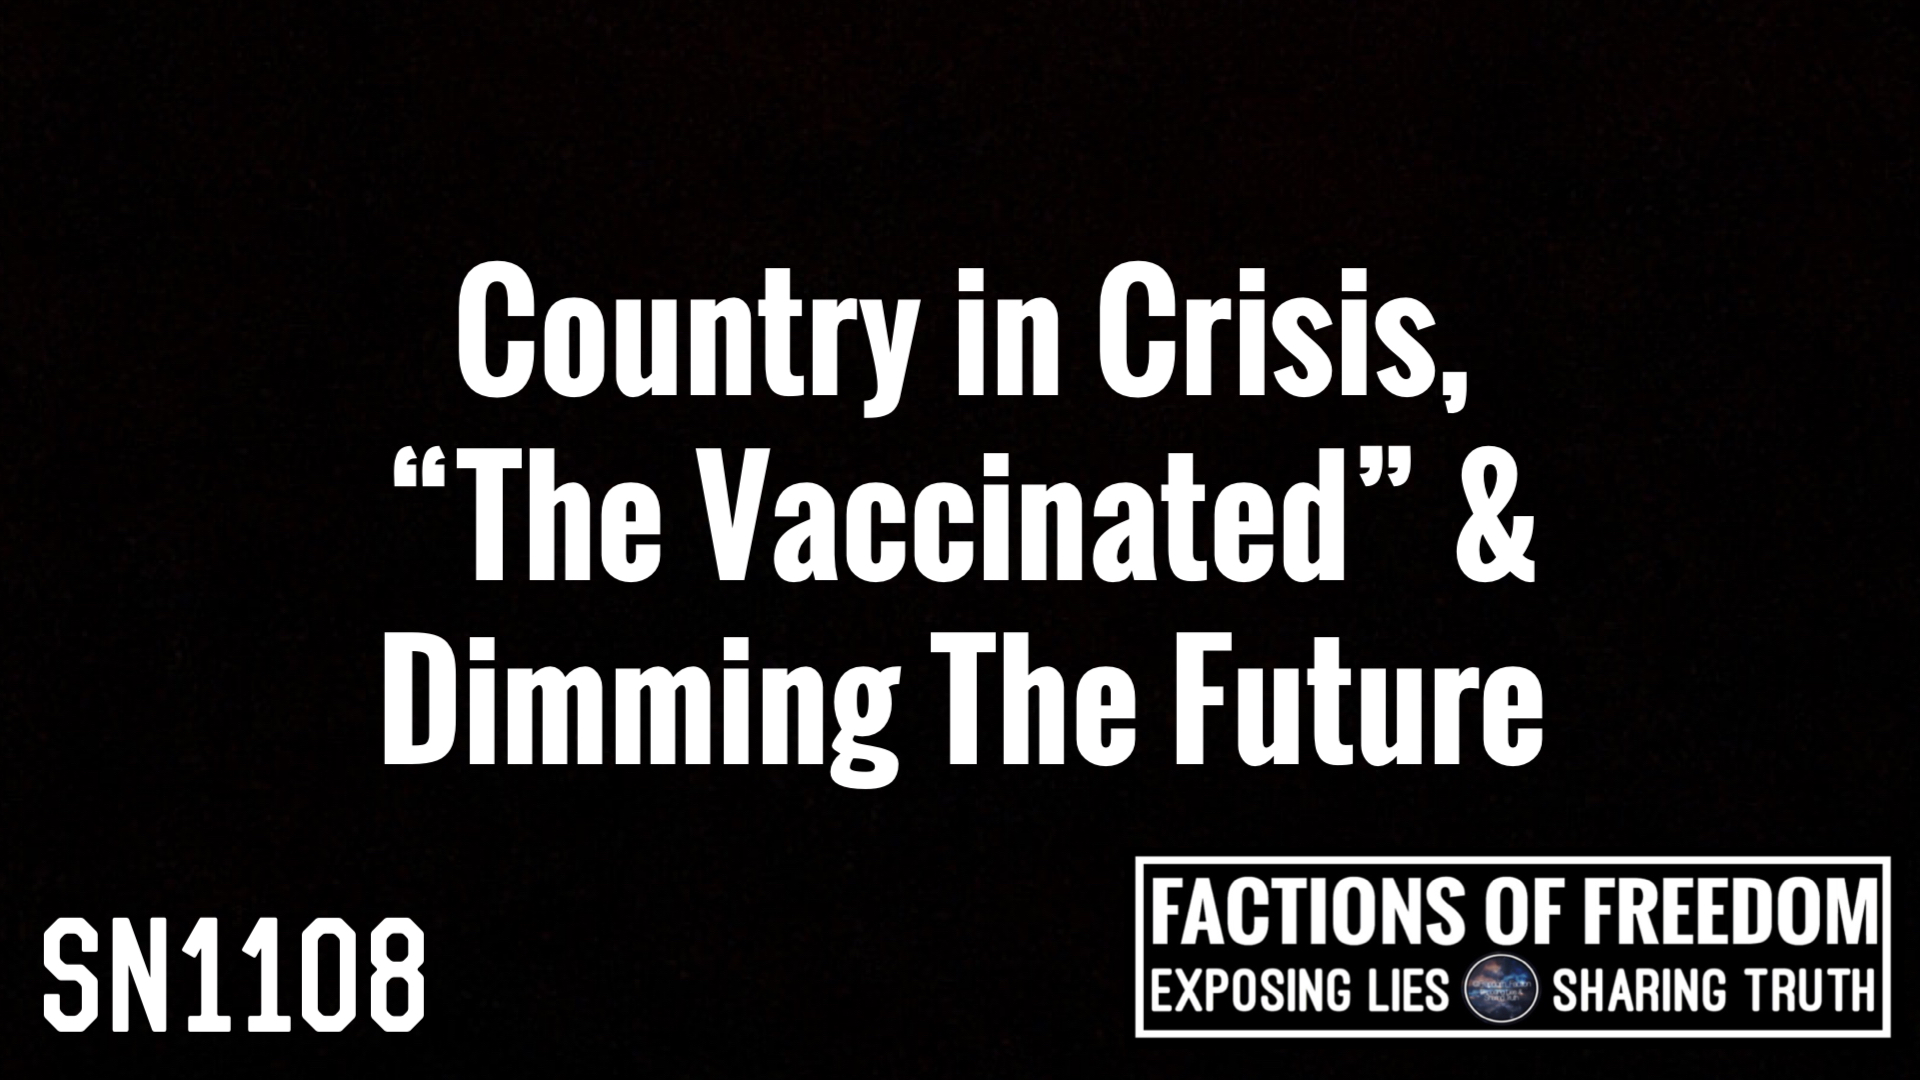 SN1108: Country in Crisis, The Vaccinated & Dimming The Future ⚠️